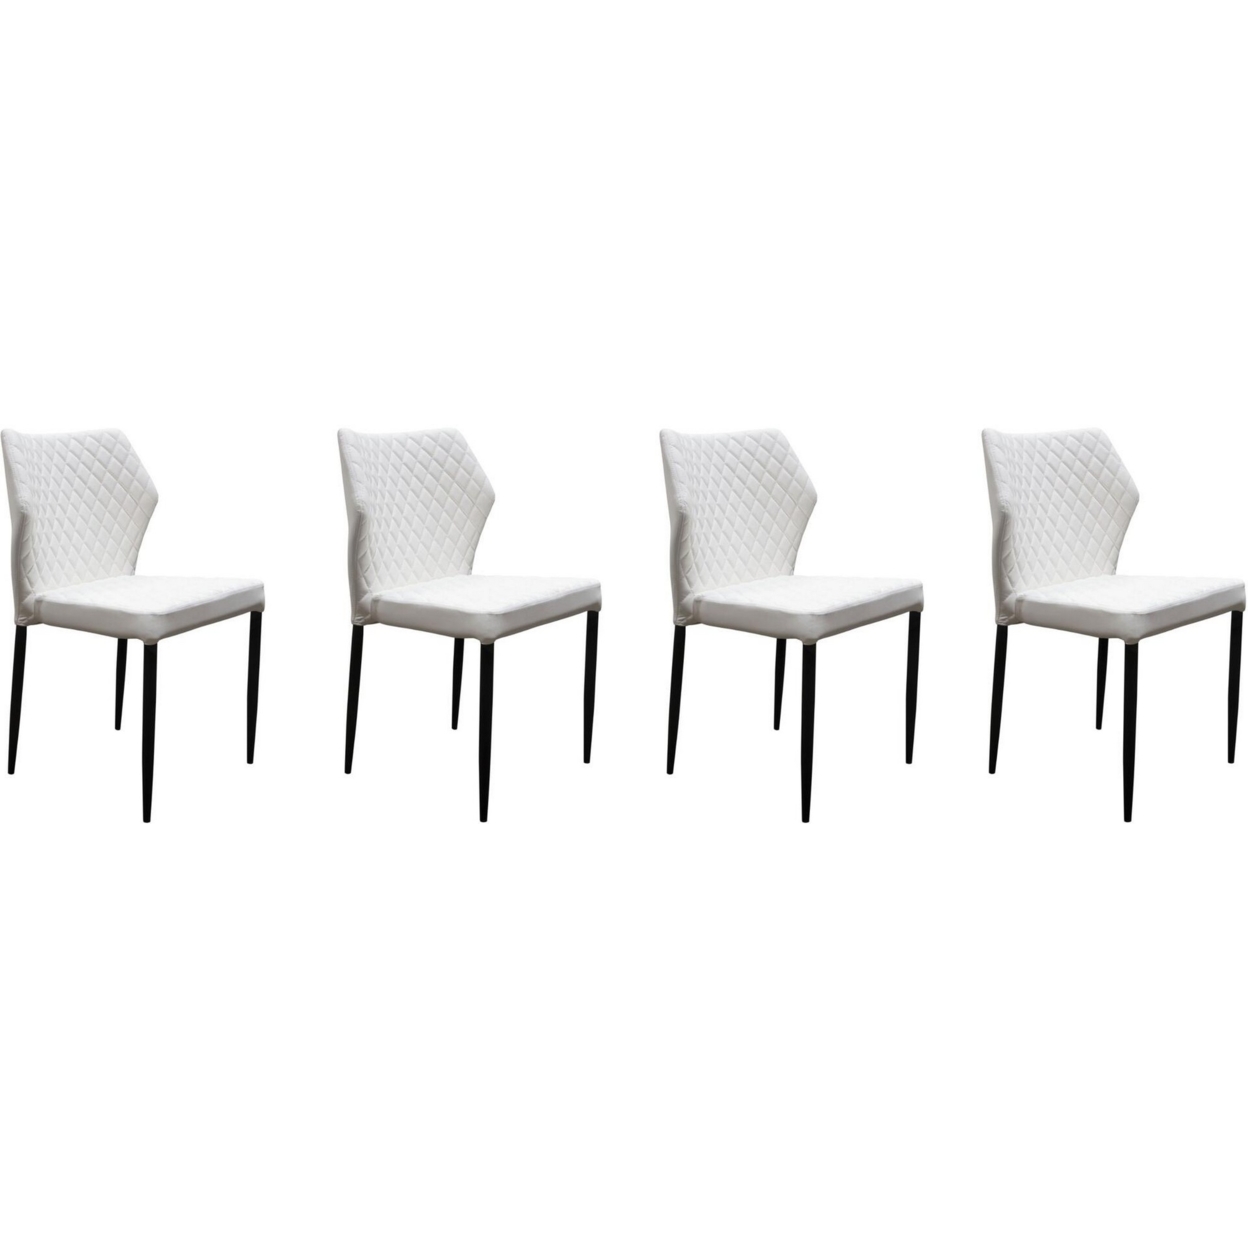 Diamond Tufted Leatherette Dining Chair With Metal Legs, White, Set Of Four- Saltoro Sherpi